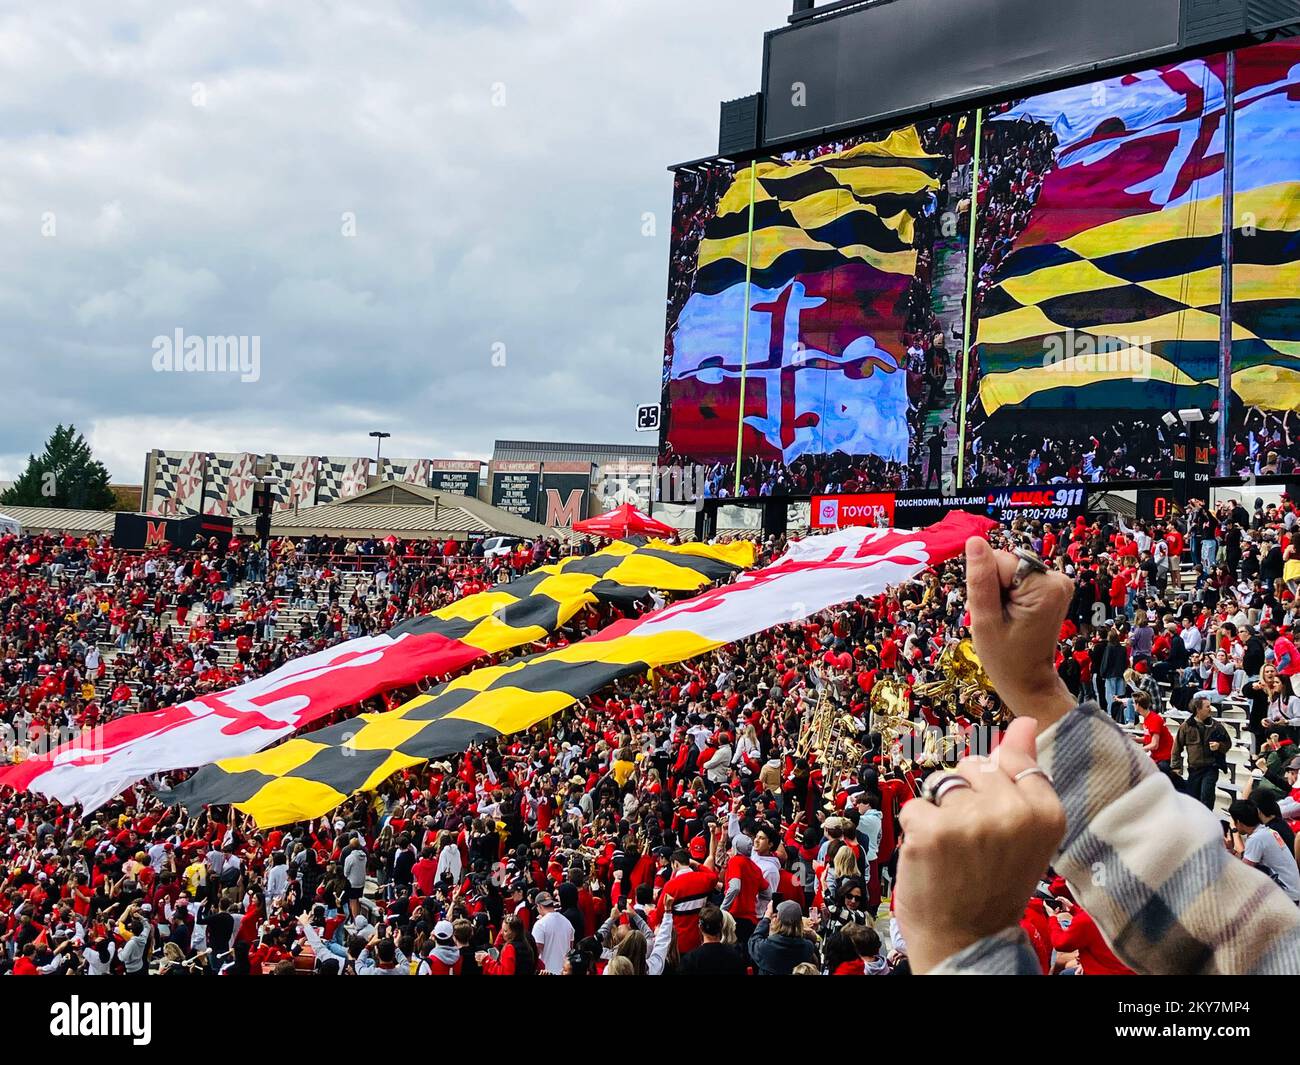 SECU Stadium is an outdoor athletic stadium on the campus of the University of Maryland in College Park, Maryland. Terrapin Football Game. Stock Photo